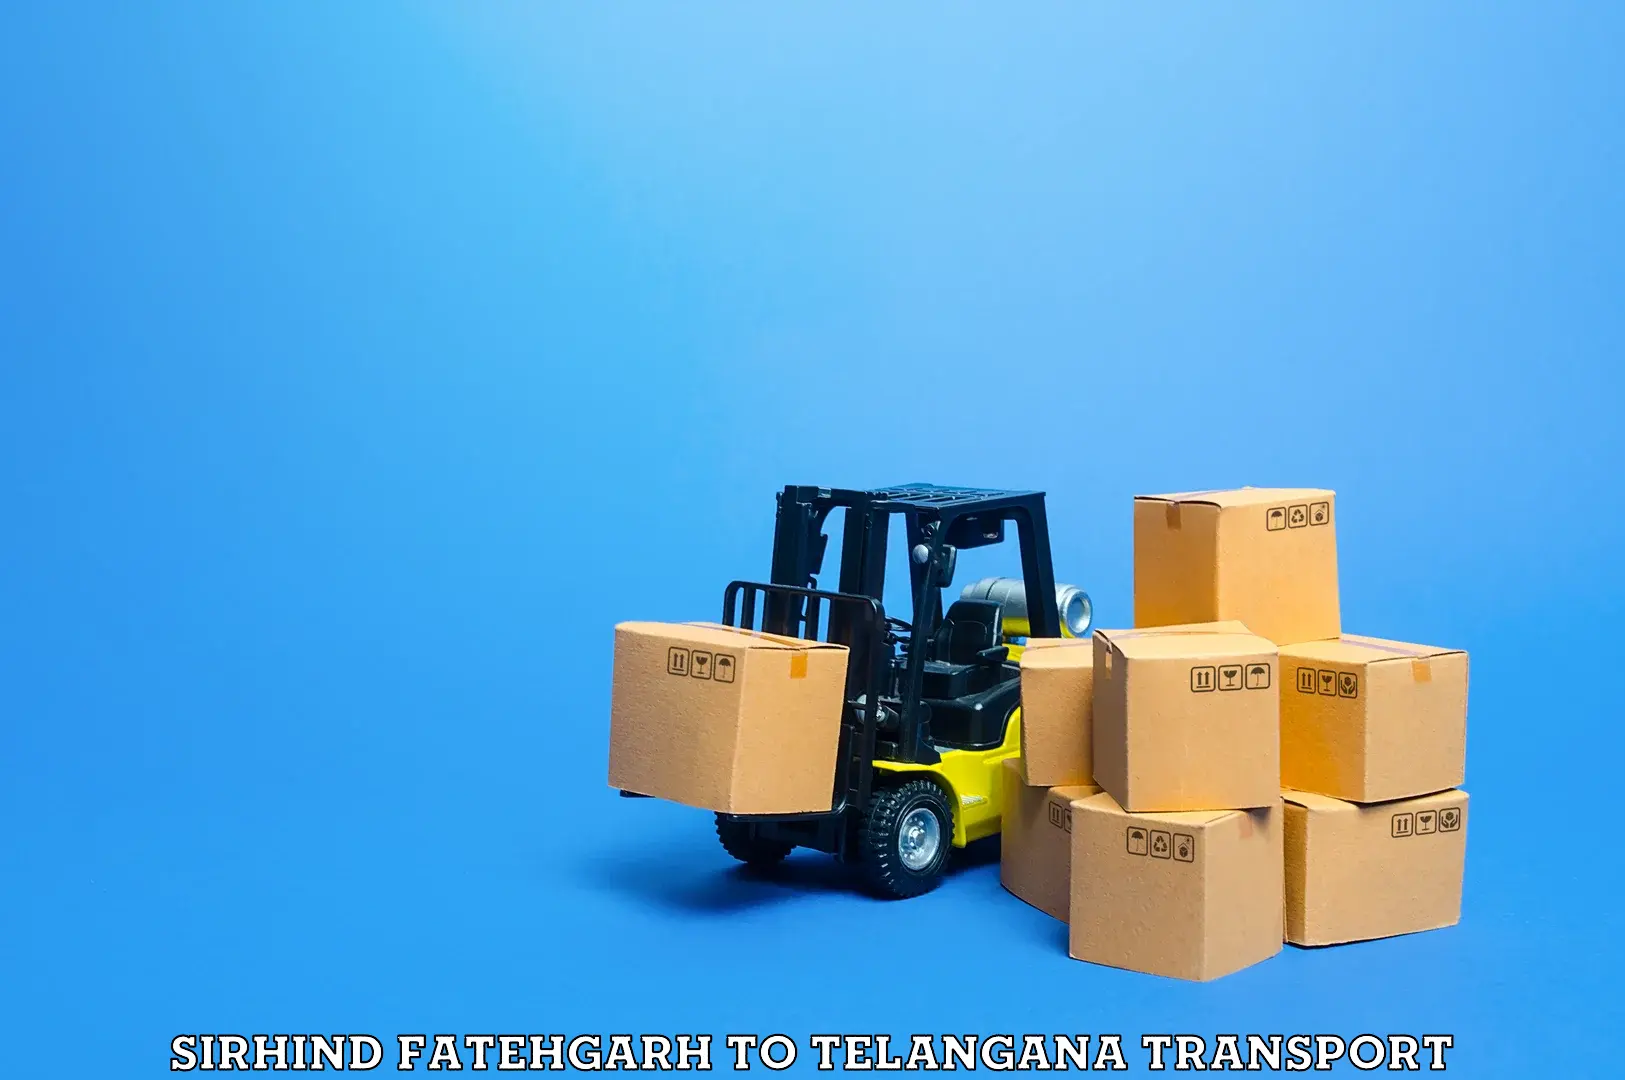 Package delivery services Sirhind Fatehgarh to Secunderabad